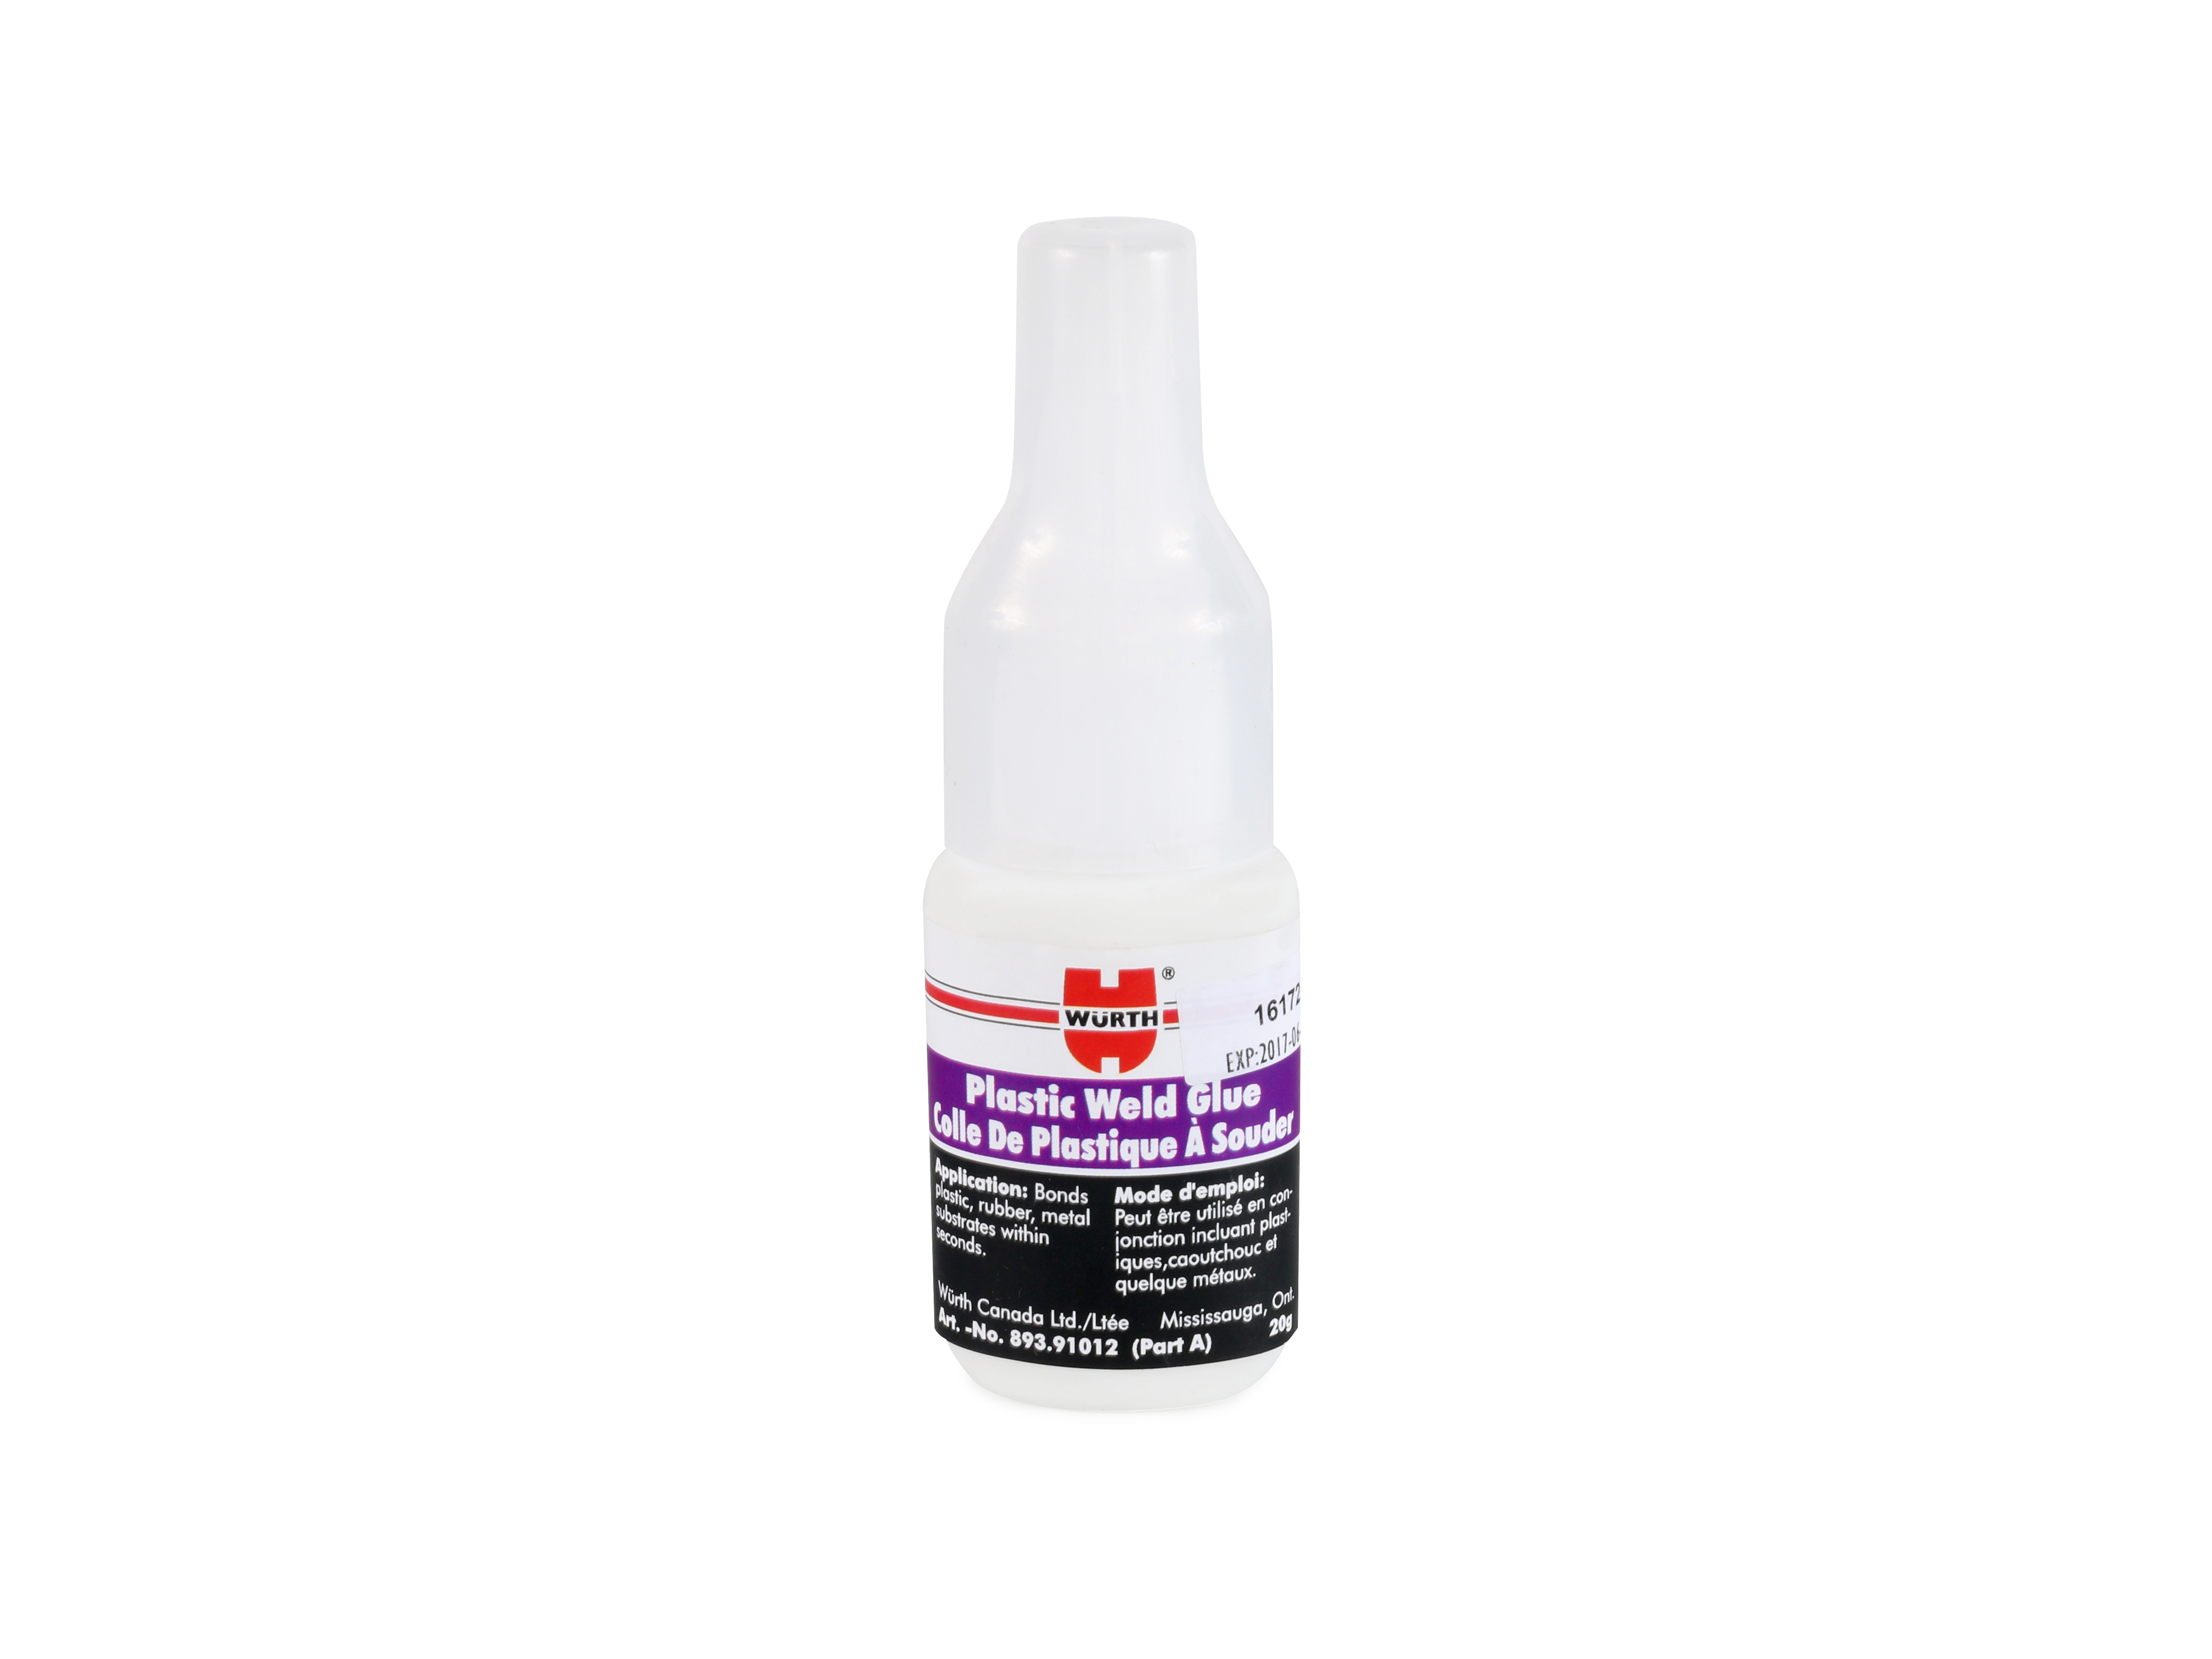 PLASTIC WELDER Adhesive 19mL (old 893.91012A)